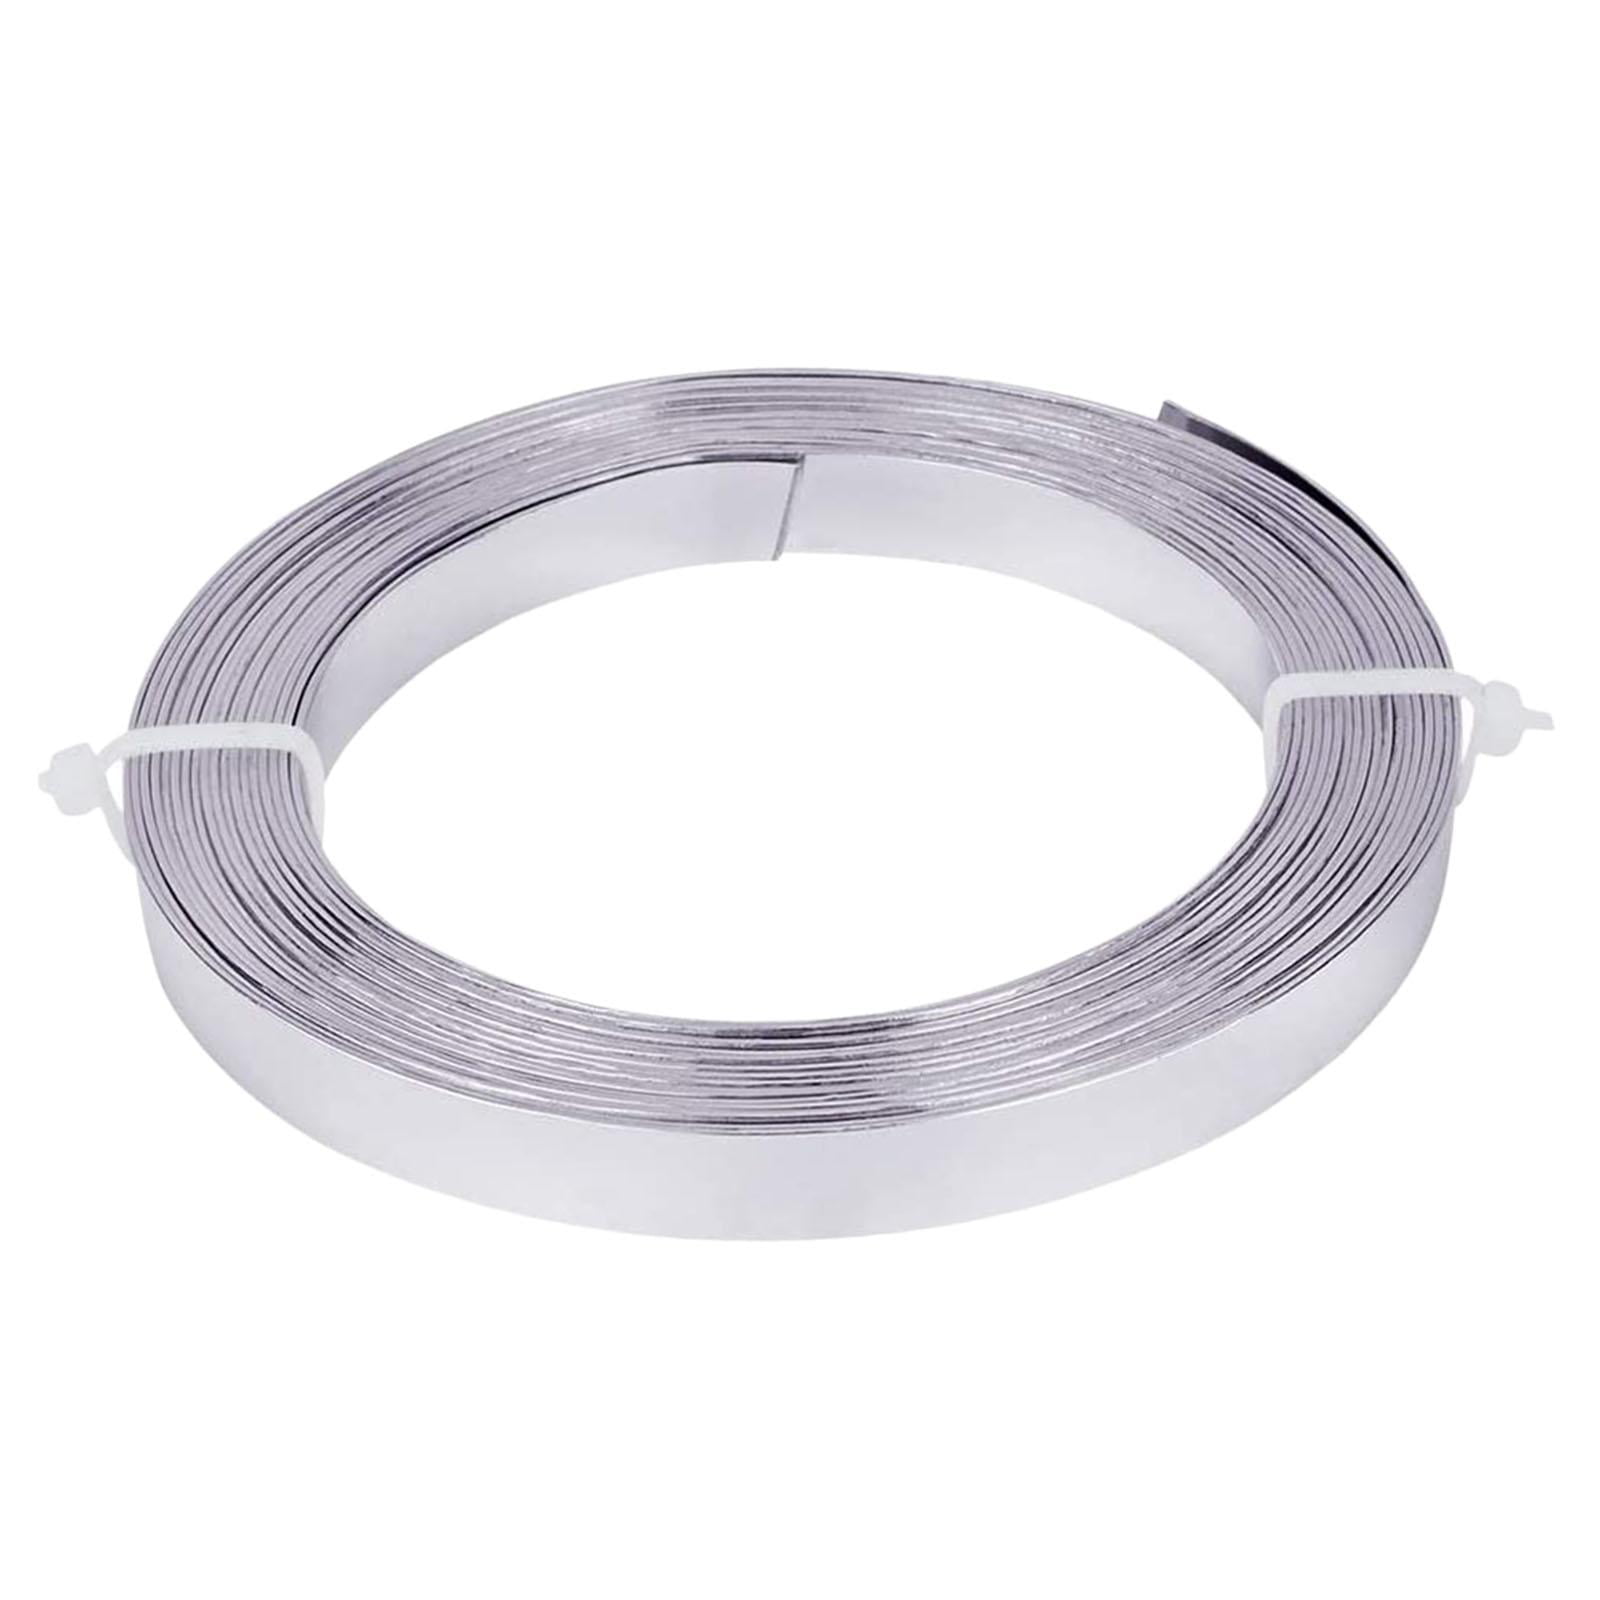 18 Gauge Aluminum Craft Wire Jewelry Making 328 Ft Metal Wire Armature  Bendable